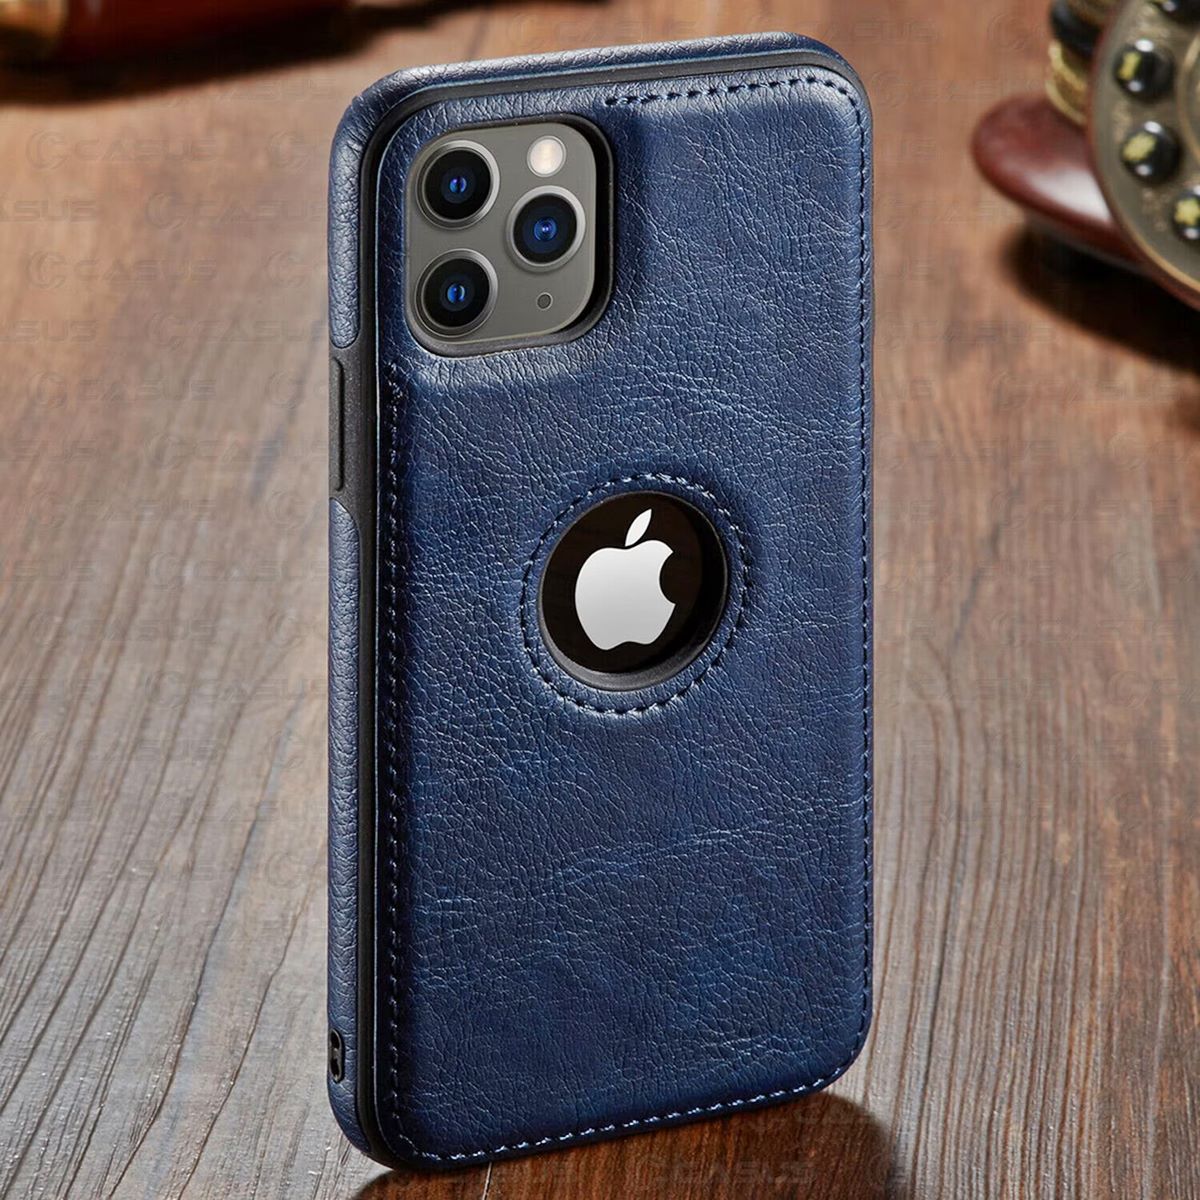 10-best-iphone-13-pro-max-cases-and-covers